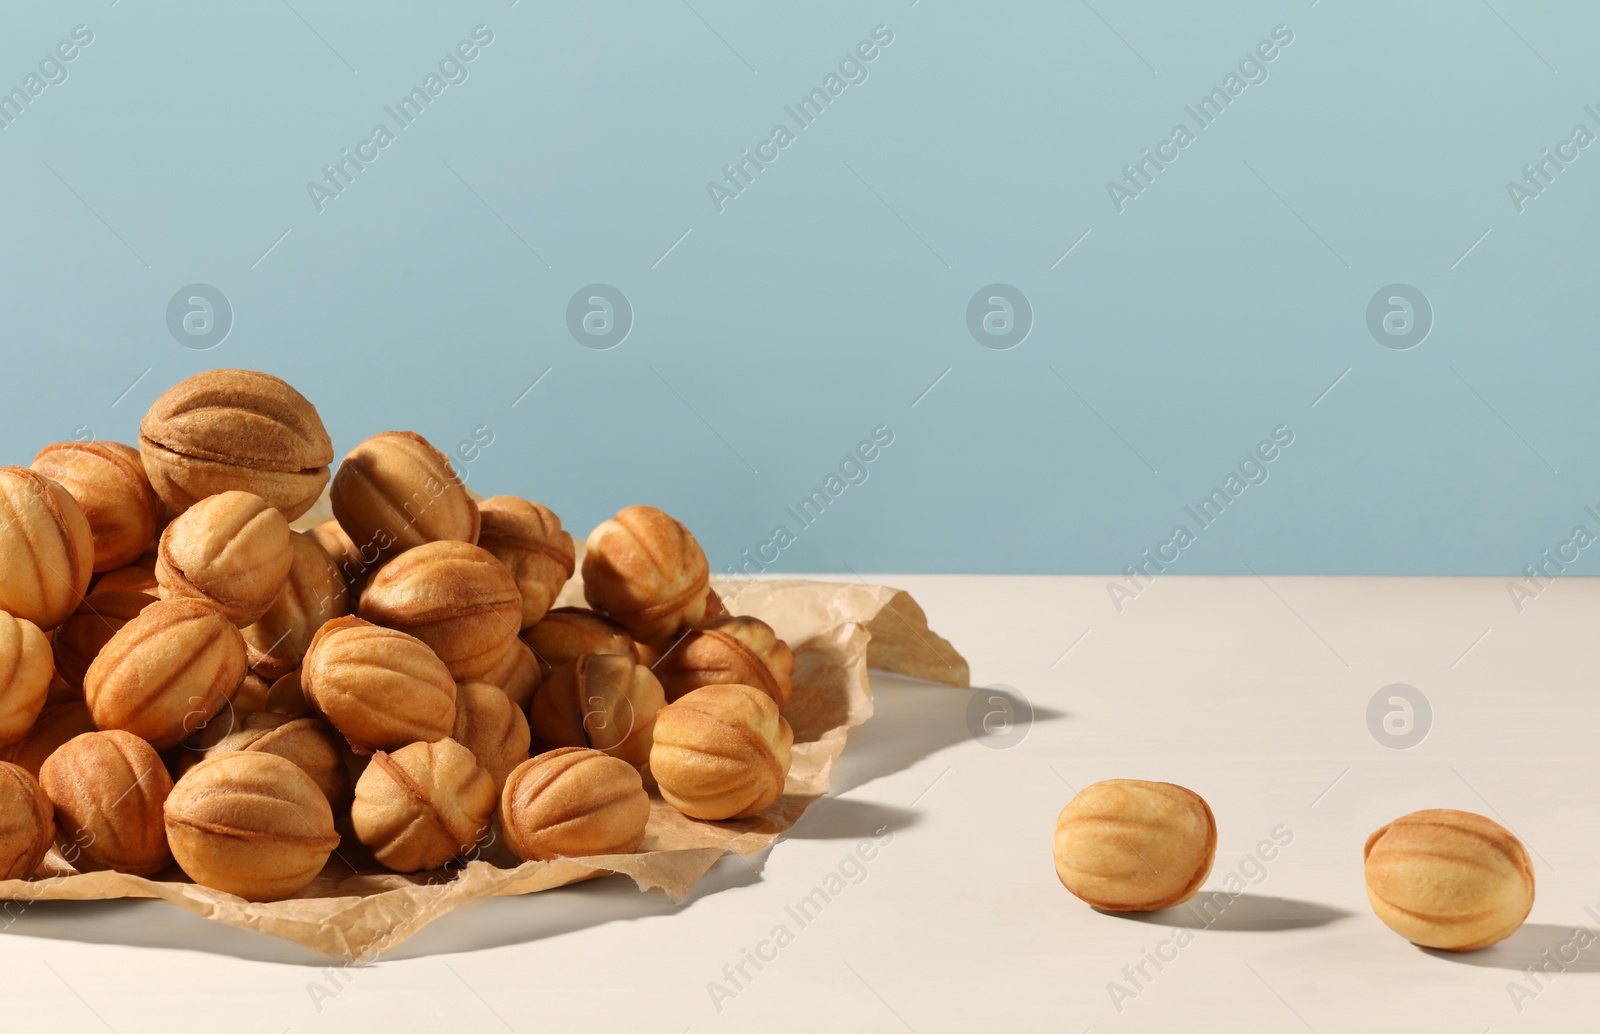 Photo of Freshly baked walnut shaped cookies on white wooden table against light blue wall, space for text. Homemade pastry filled with caramelized condensed milk